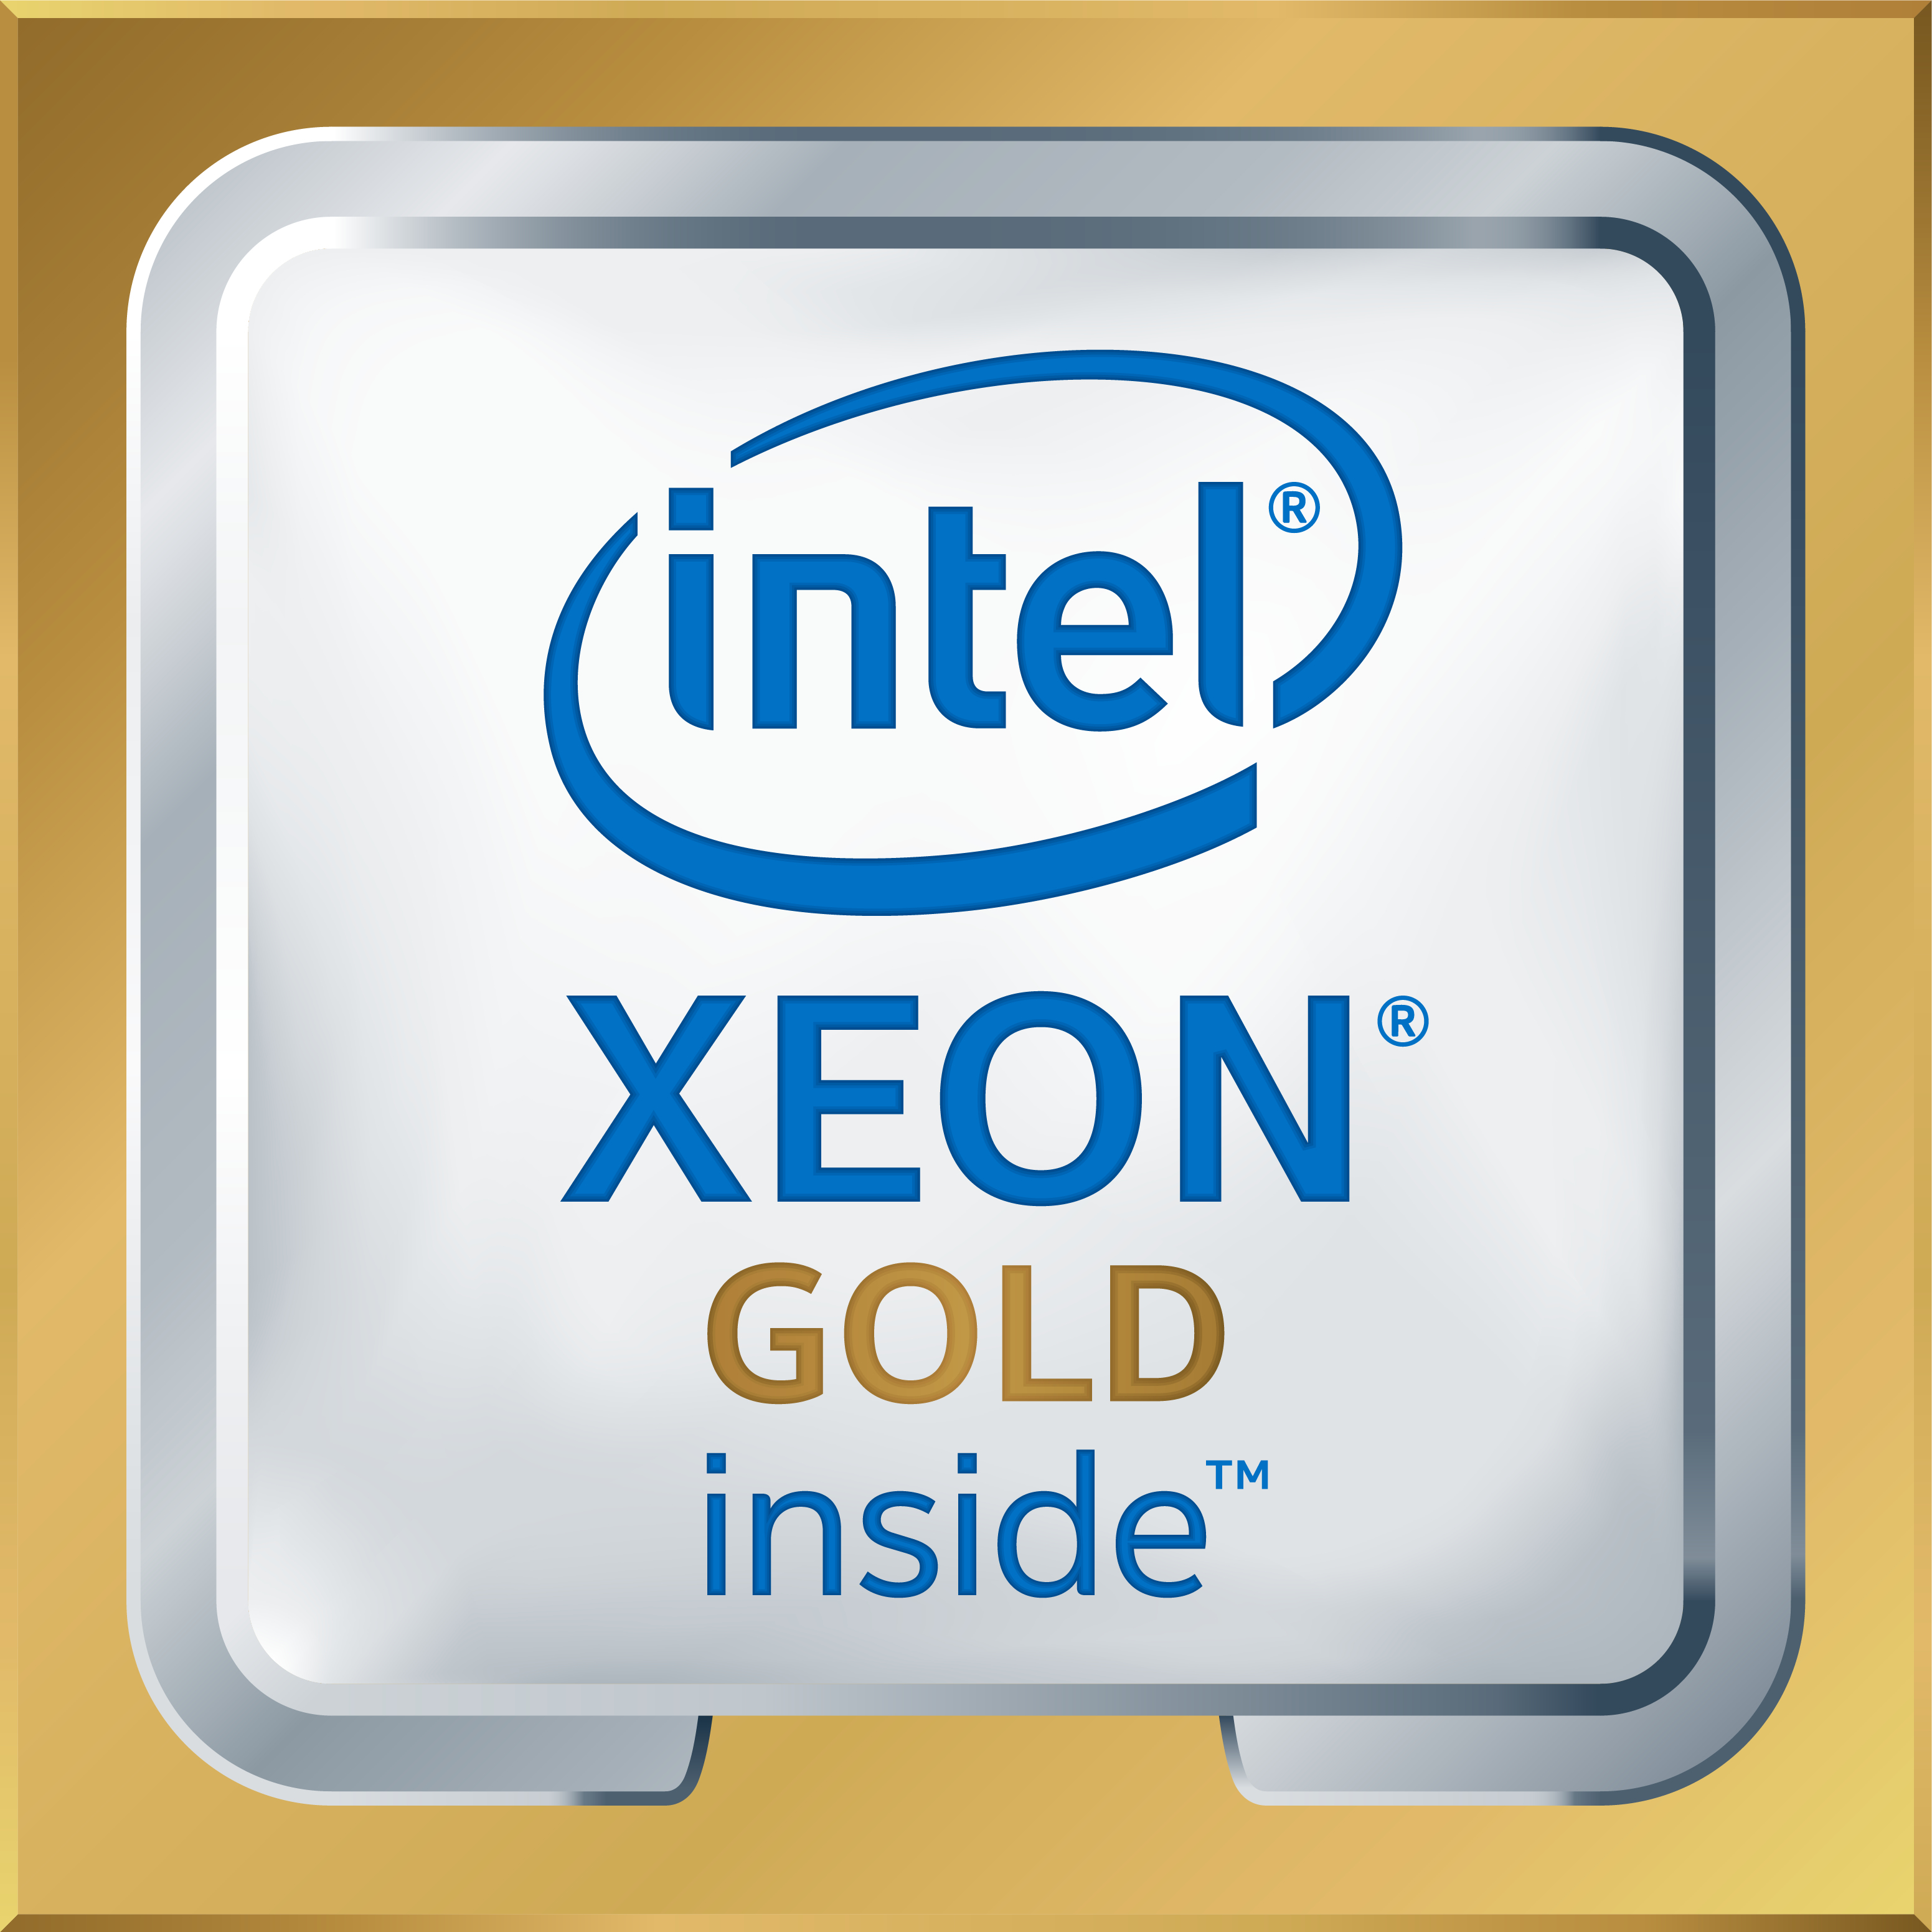 2 x Intel Xeon Gold 6136 - 3 GHz - 12-core - 24.75 MB cache - for ThinkSystem SN850